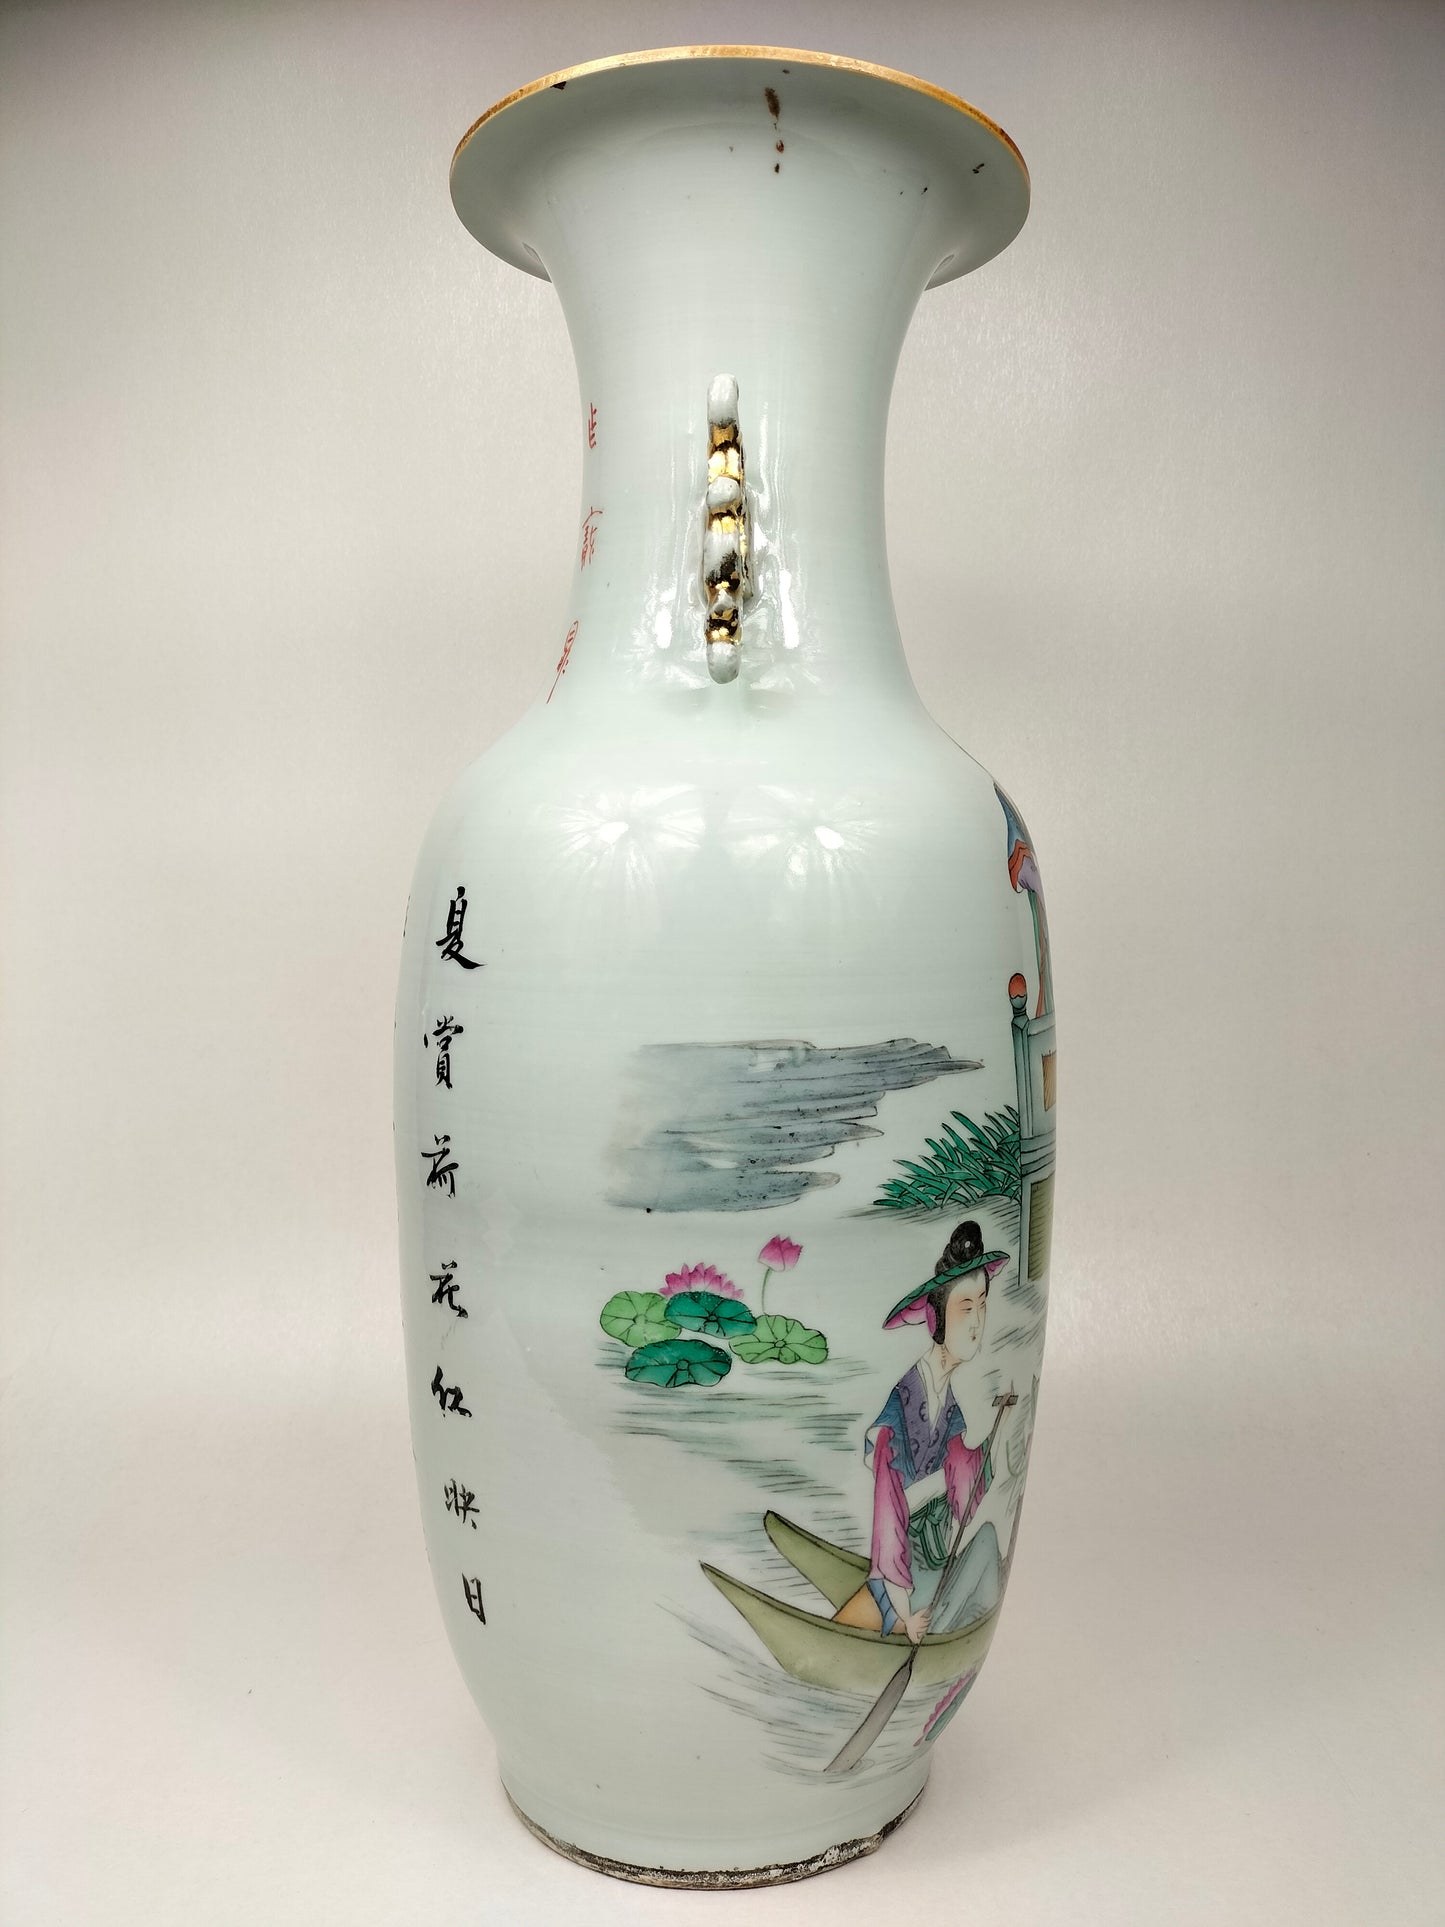 Large antique Chinese vase decorated with an Imperial scene // Republic Period (1912-1949)